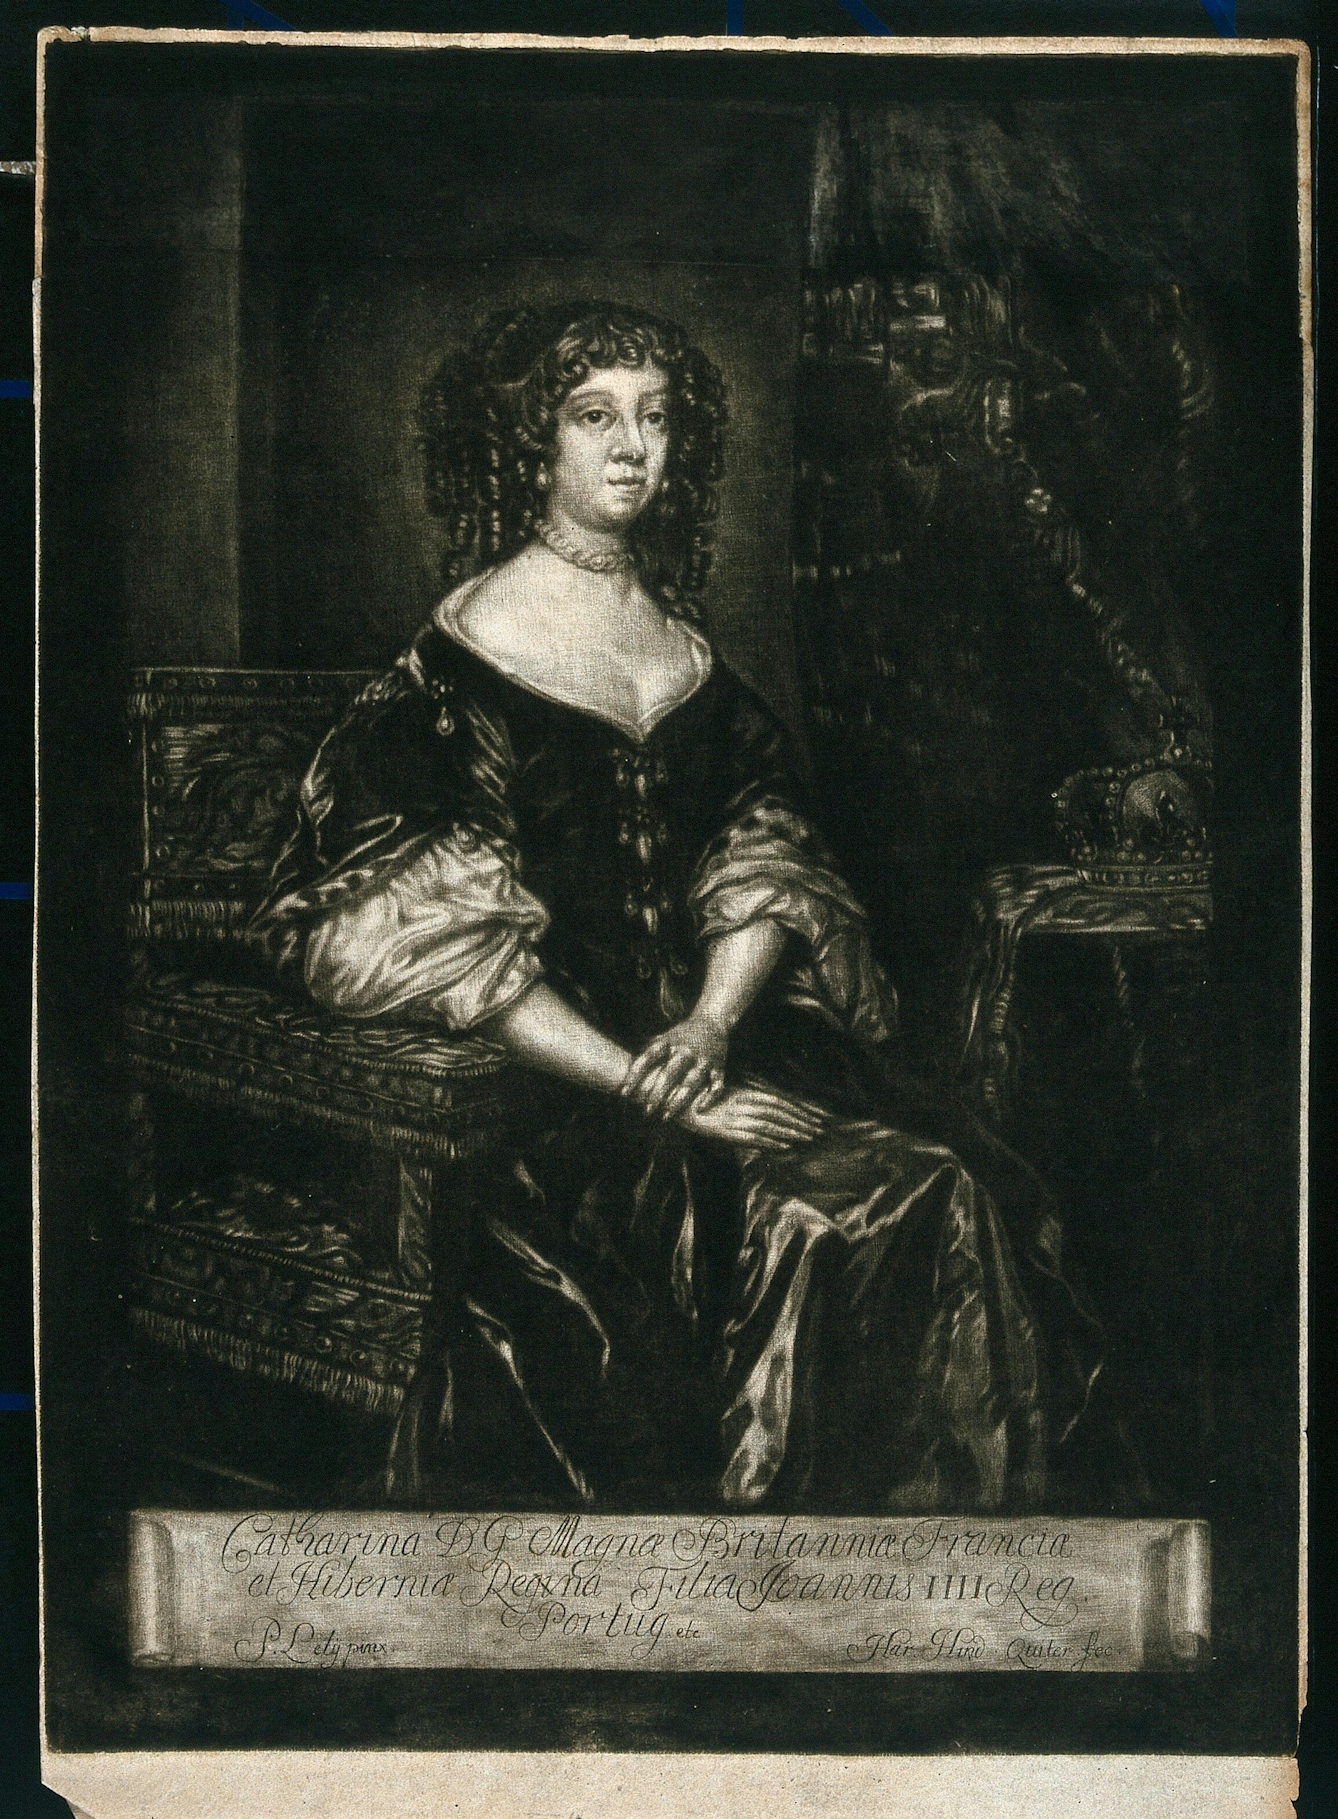 Mezzotint of Catherine of Braganza, consort of King Charles II. Catherine is shown sitting demurely, wearing a long dress and her arms crossed into her lap. To her left is a bejewelled crown. 